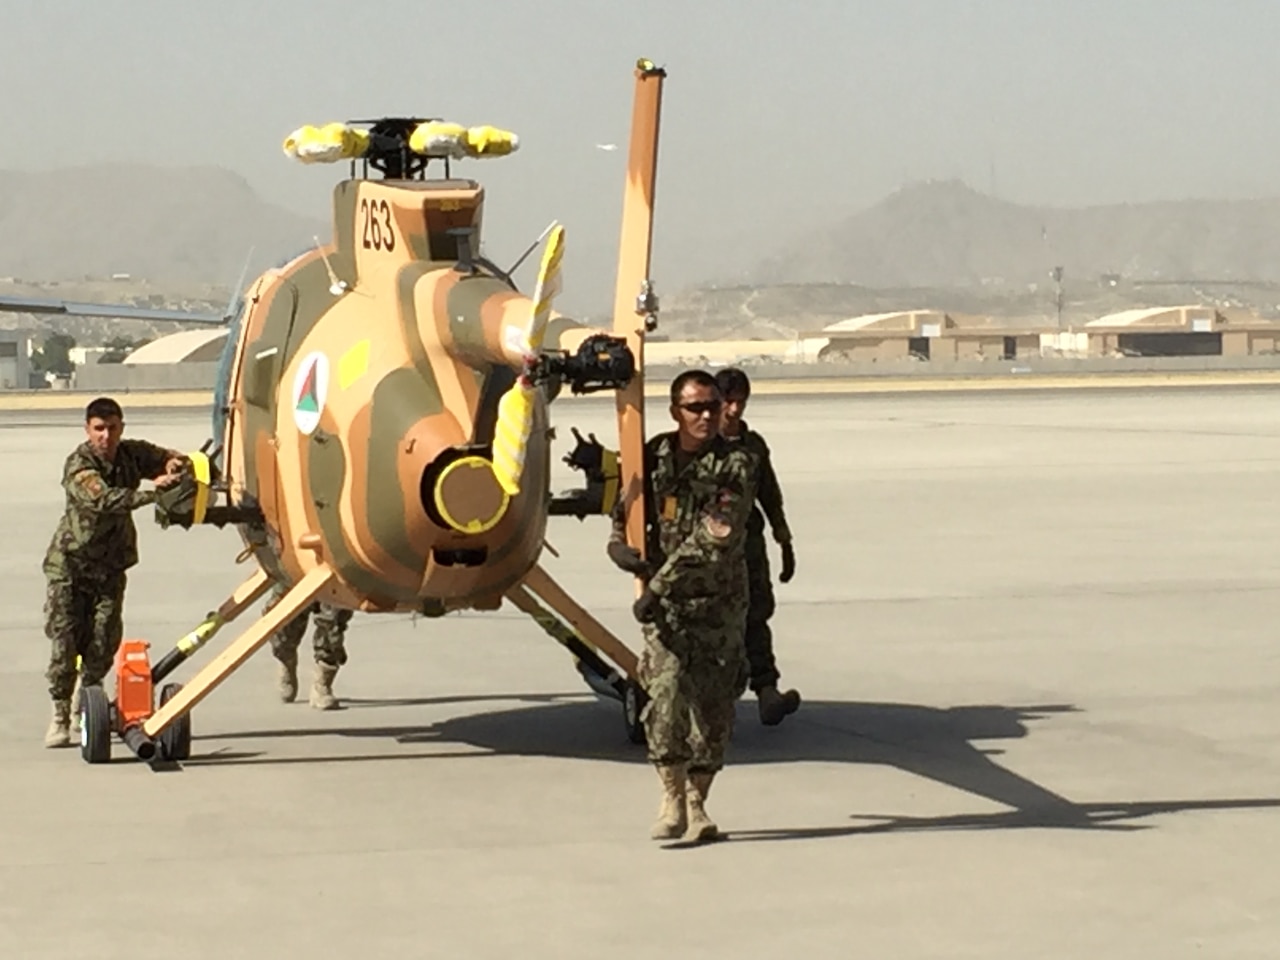 Members of the Afghan air force wheel out a new MD-530 Cayuse Warrior helicopter at the 438th Air Expeditionary Wing/Train, Advise, Assist Command-Air in Kabul, Afghanistan, July 16, 2016. 